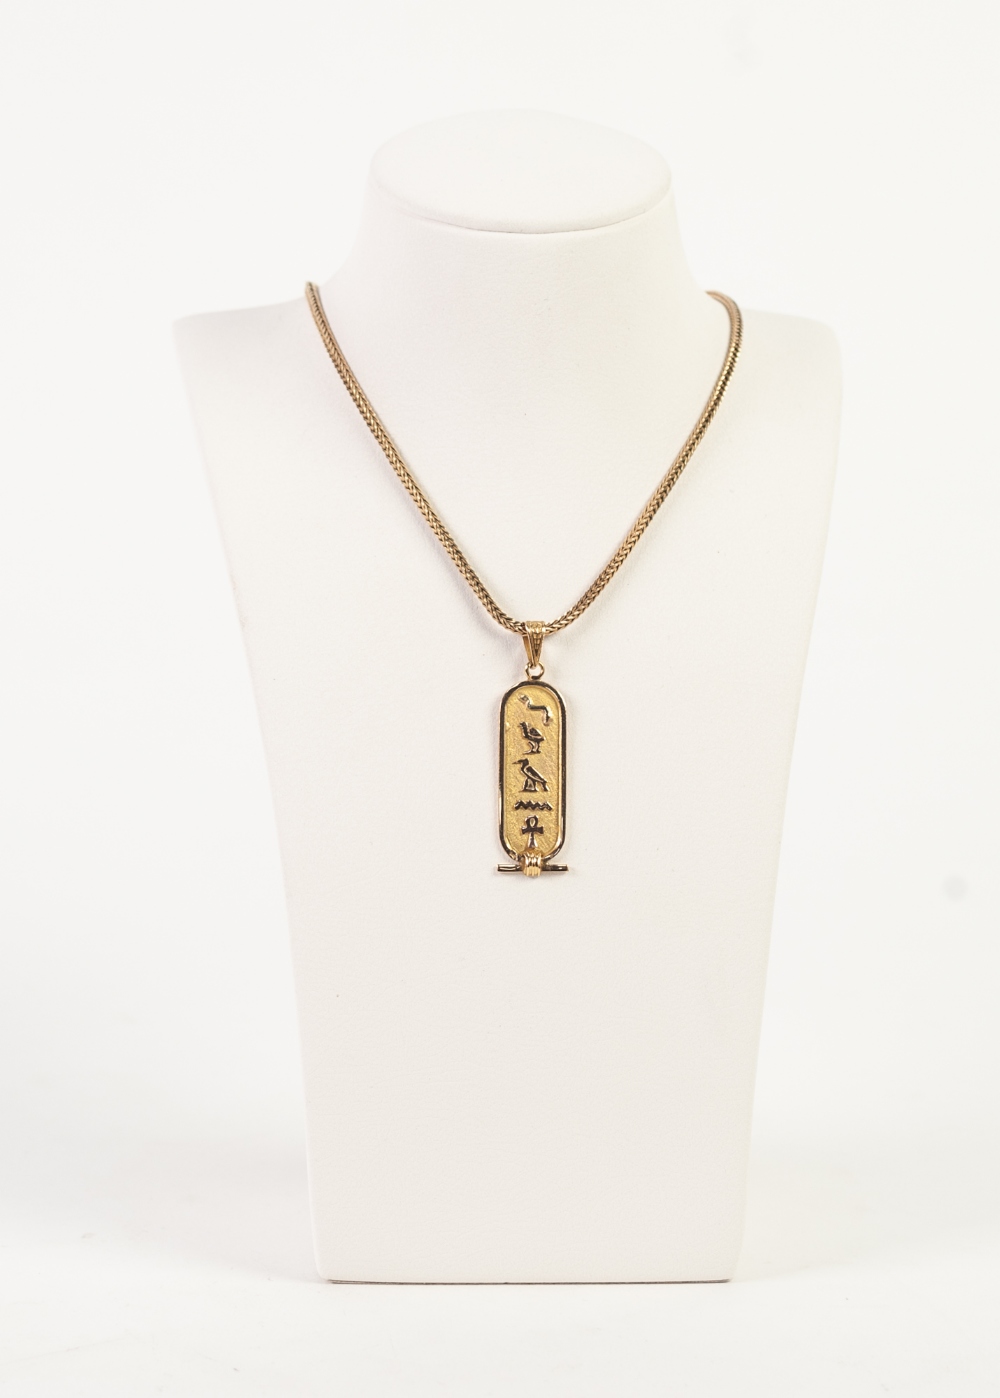 9k GOLD CHARM LINK NECKLACE, 15 1/2" long, 6.9gms and an EGYPTIAN GOLD COLOURED METAL ROUND OBLONG